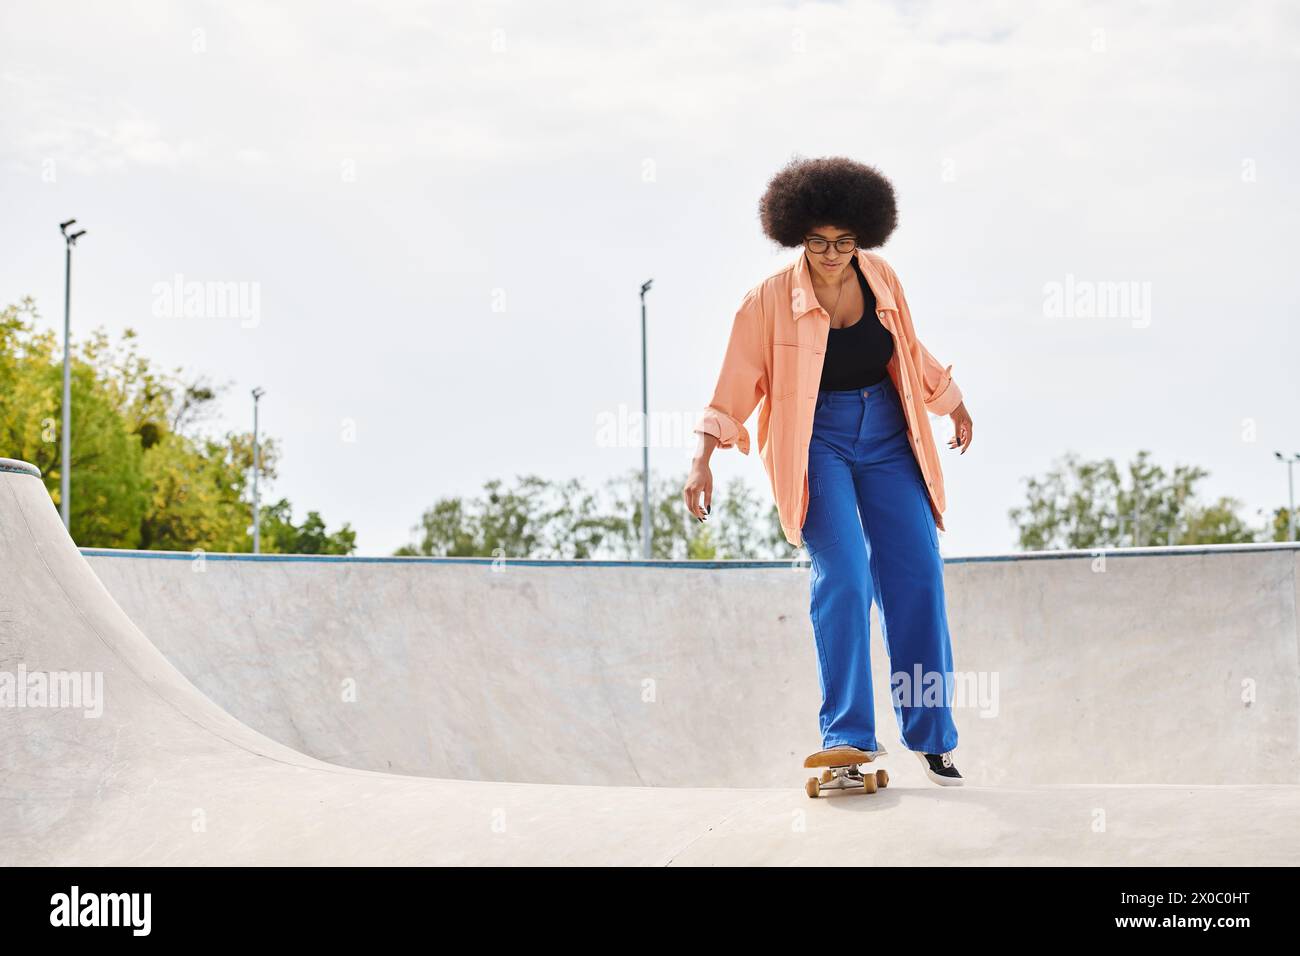 A young African American woman with curly hair skilfully rides a skateboard up the side of a ramp in a vibrant skate park. Stock Photo